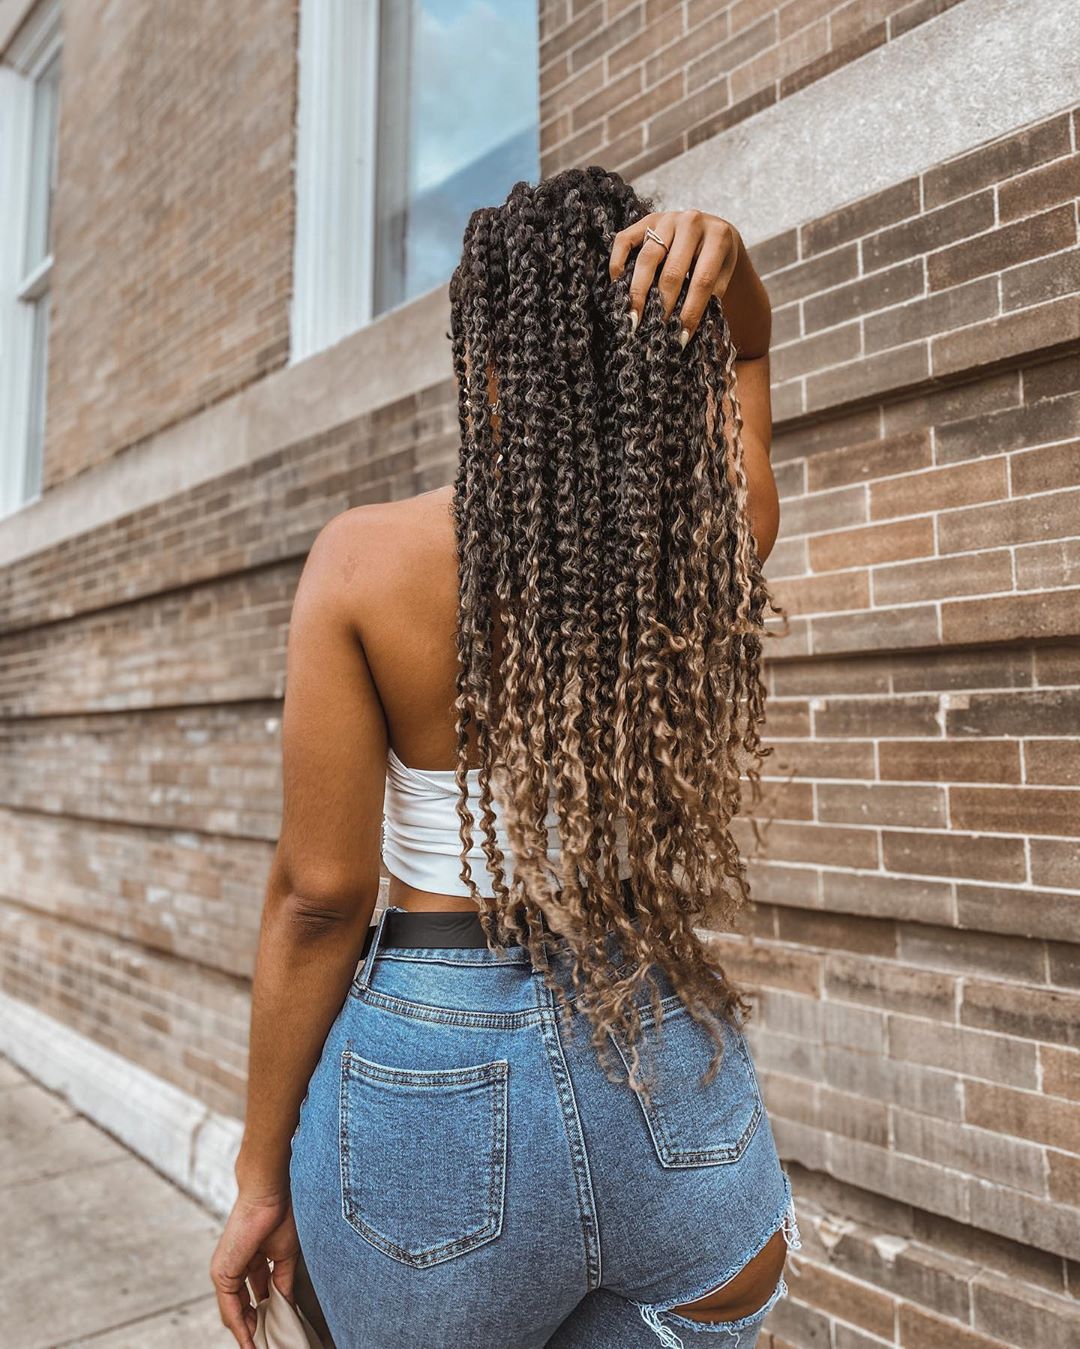 marley twists featured image